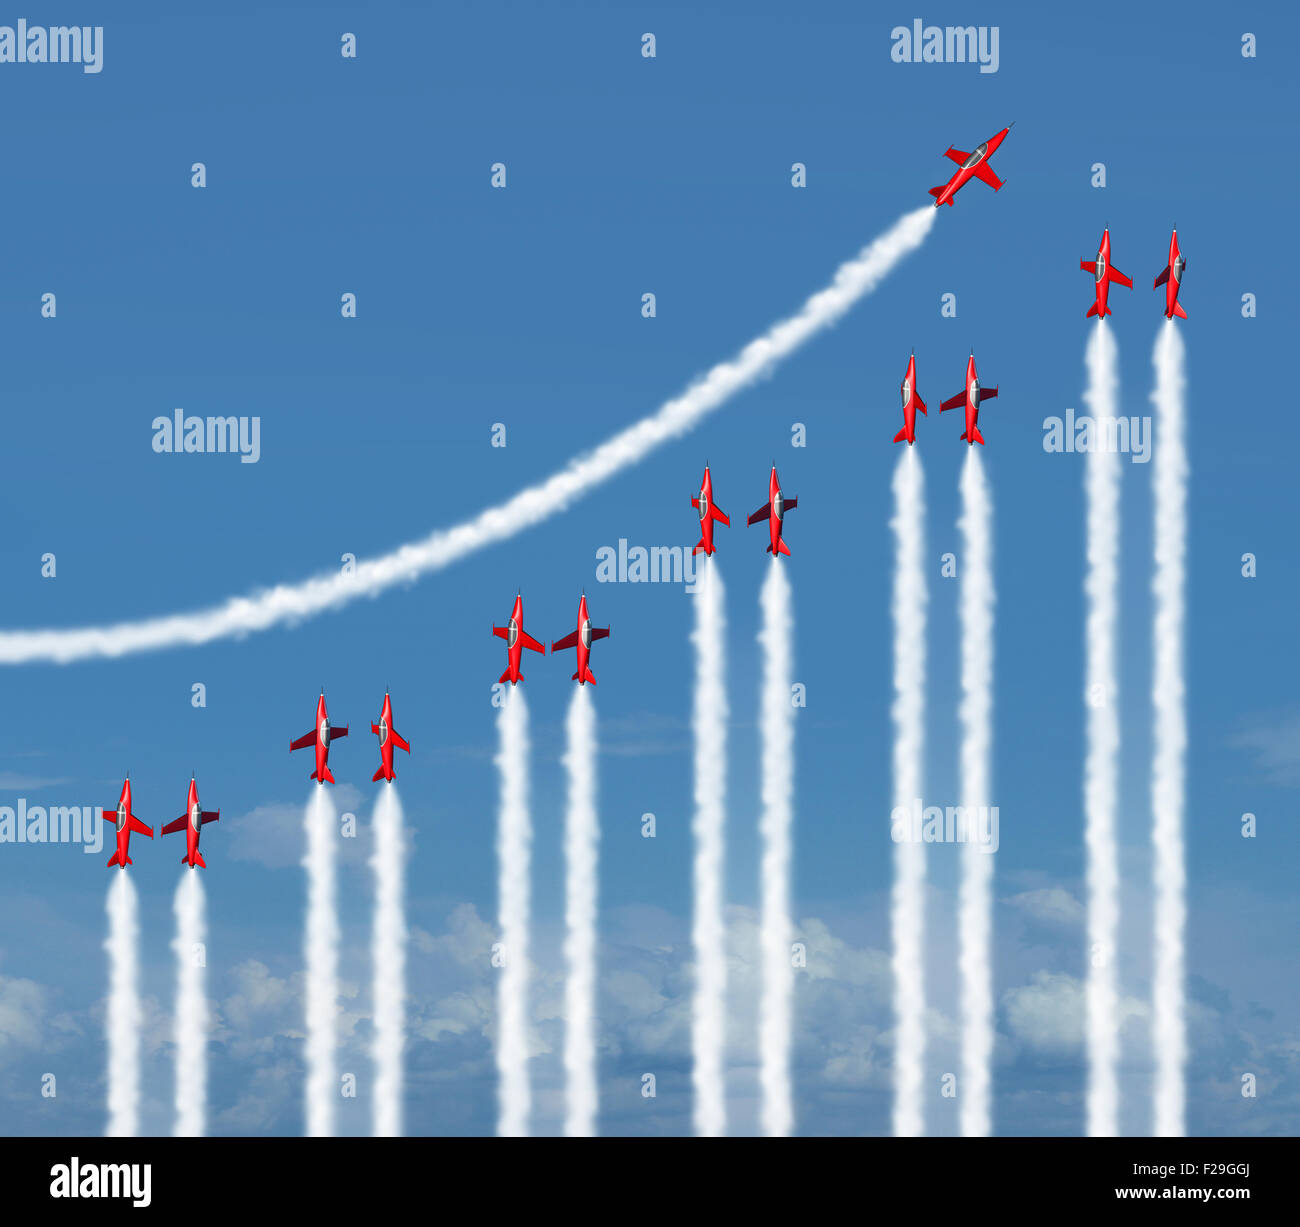 Business graph chart diagram concept as a group of acrobatic jet airplanes flying with smoke trails shaped as a financial infograph icon for rising wealth and success. Stock Photo